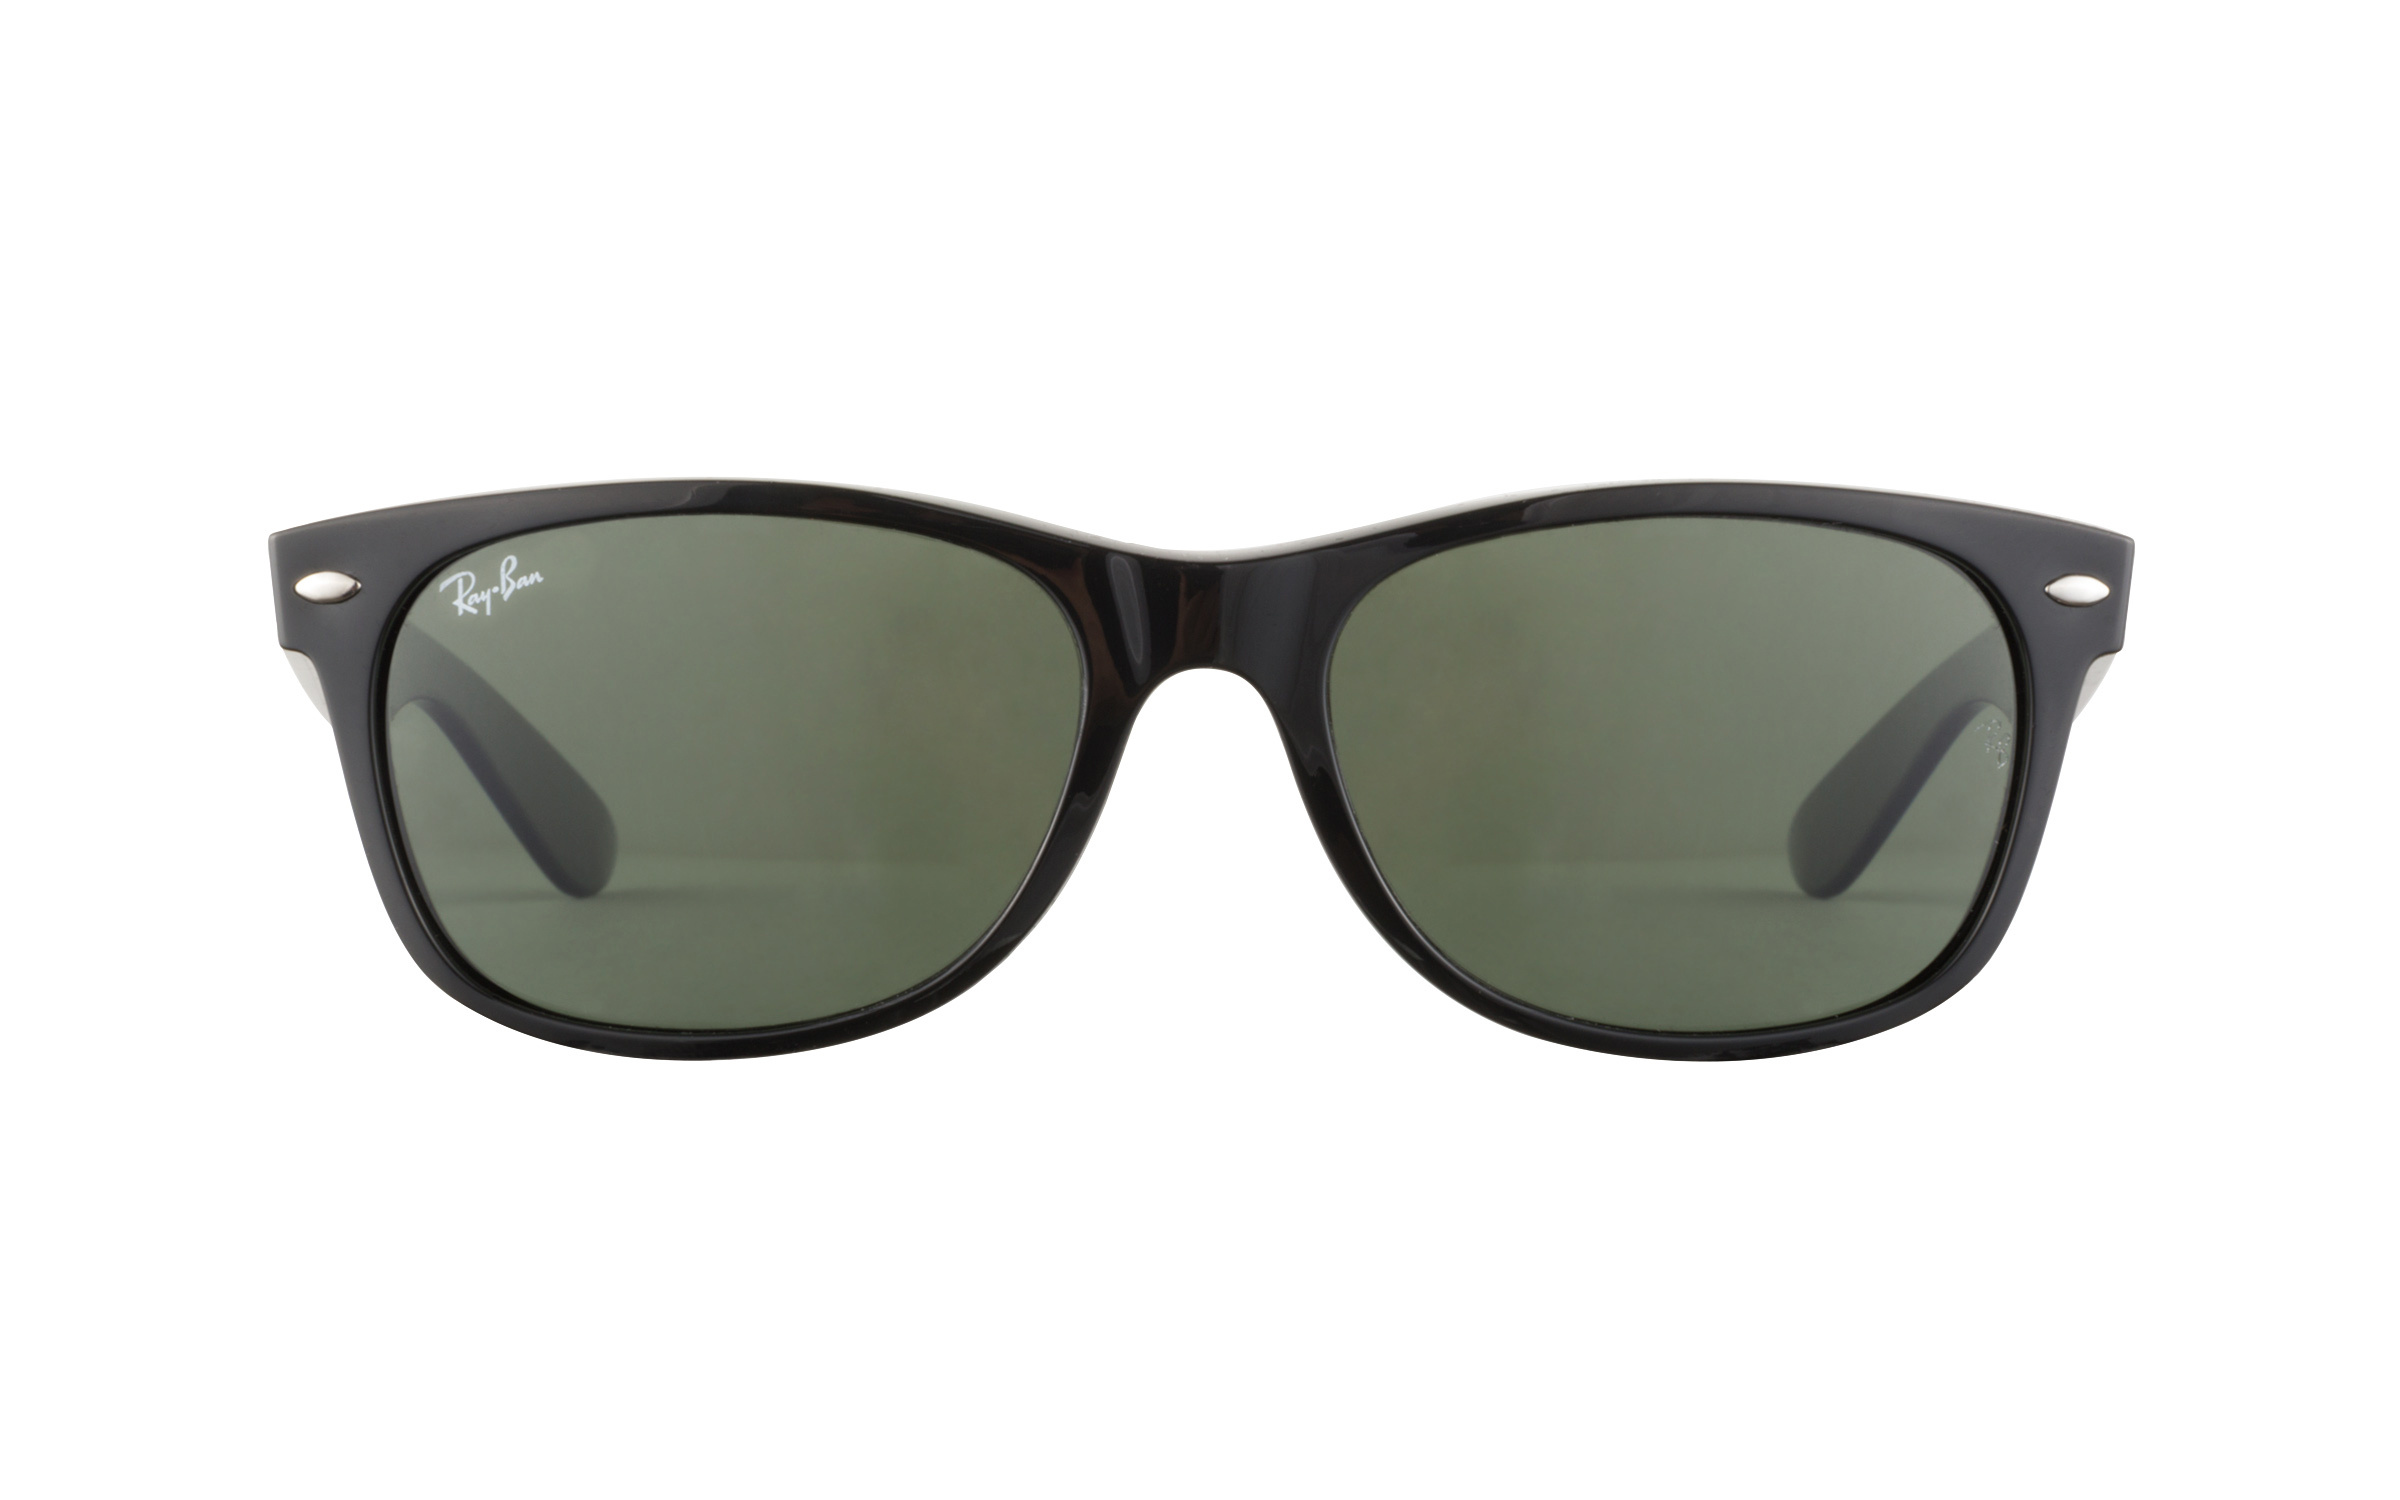 how much cost ray ban sunglasses